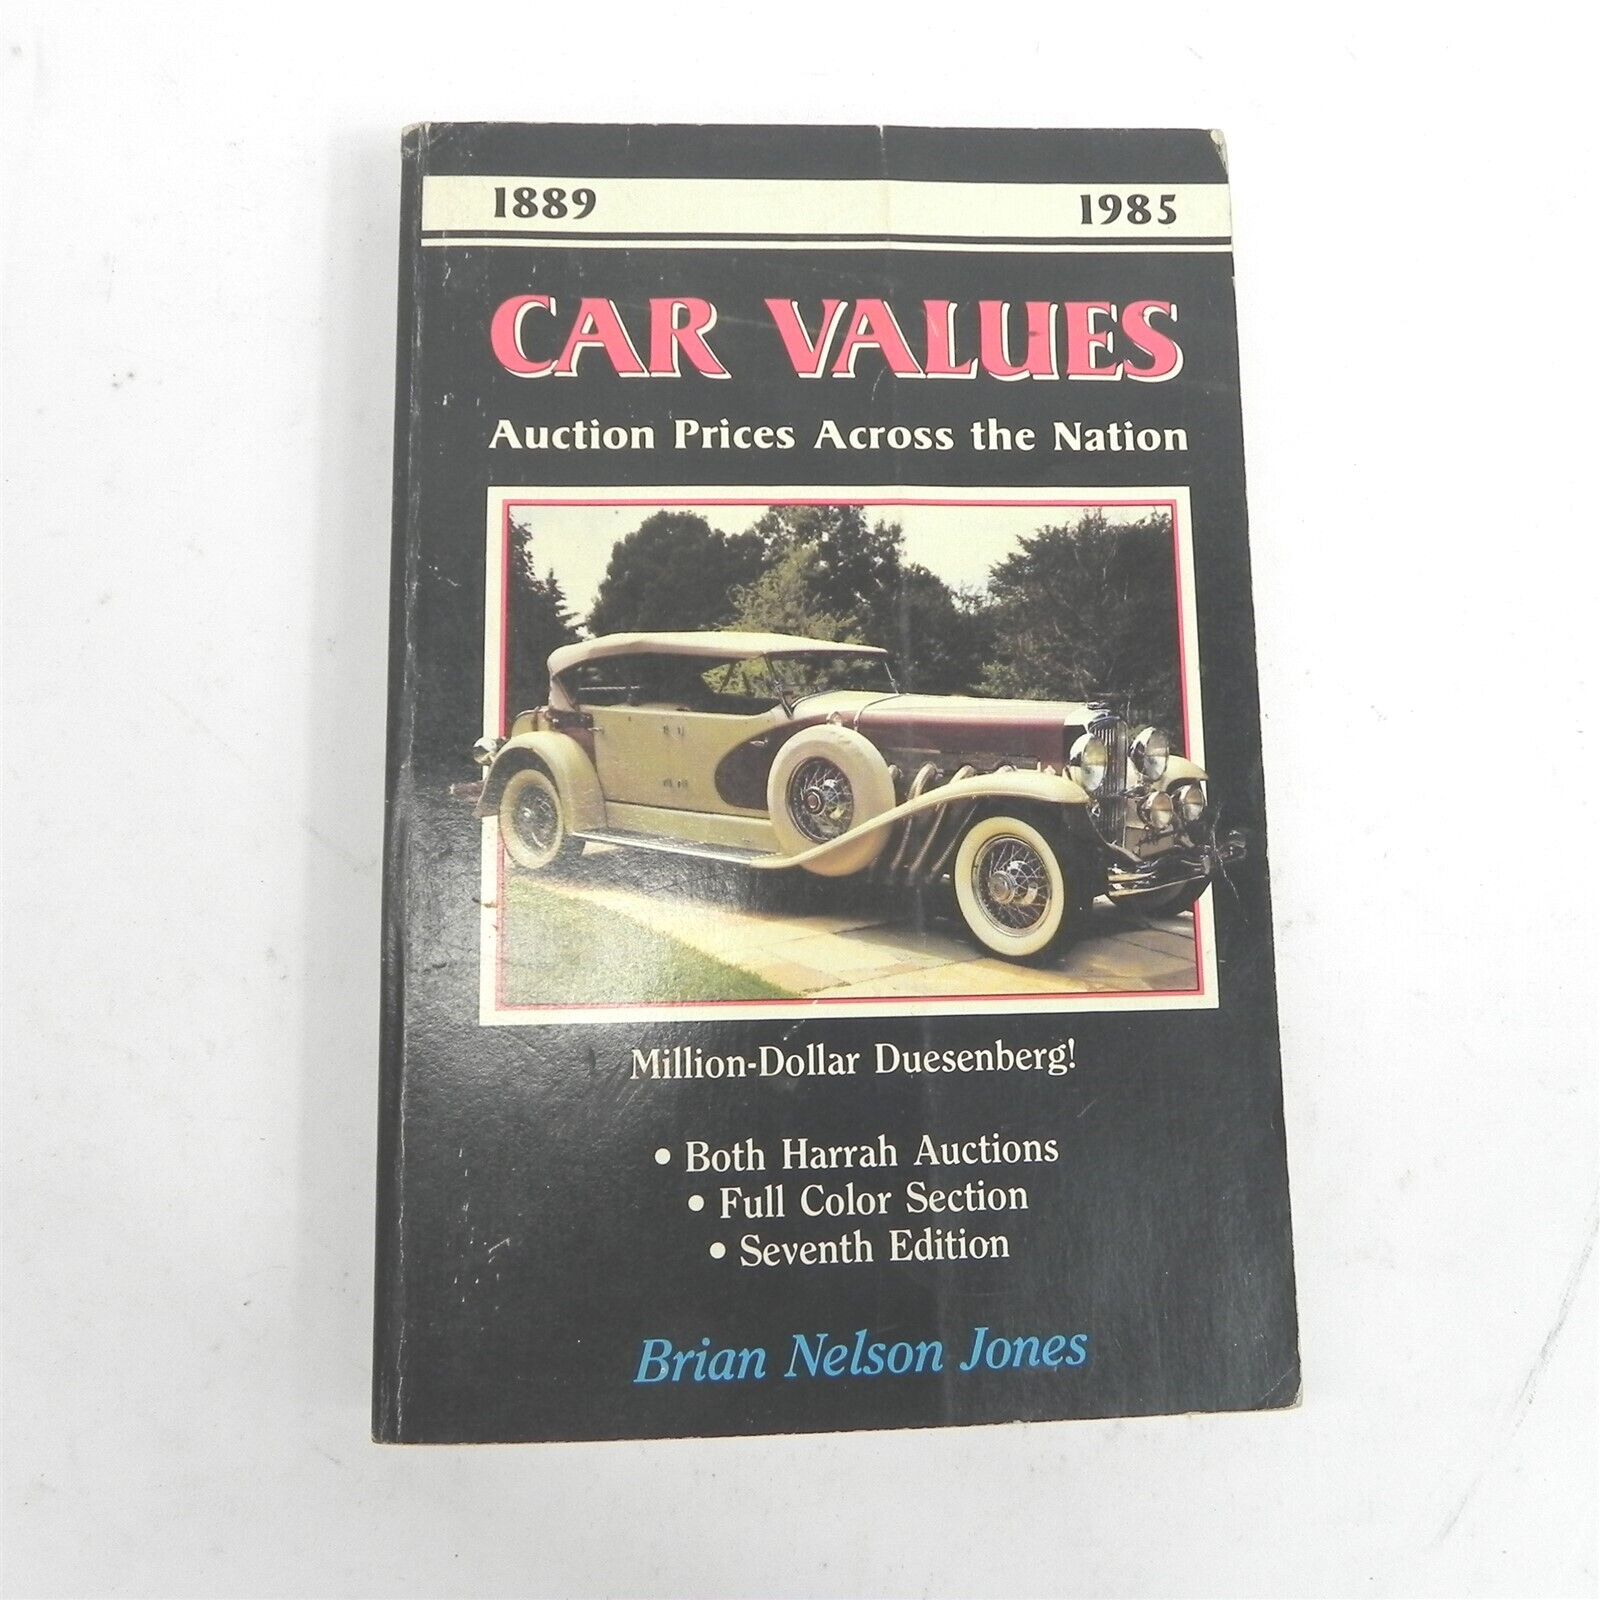 VINTAGE 1985 CAR VALUES AUCTION PRICES FROM ACROSS THE NATION PRICE GUIDE 